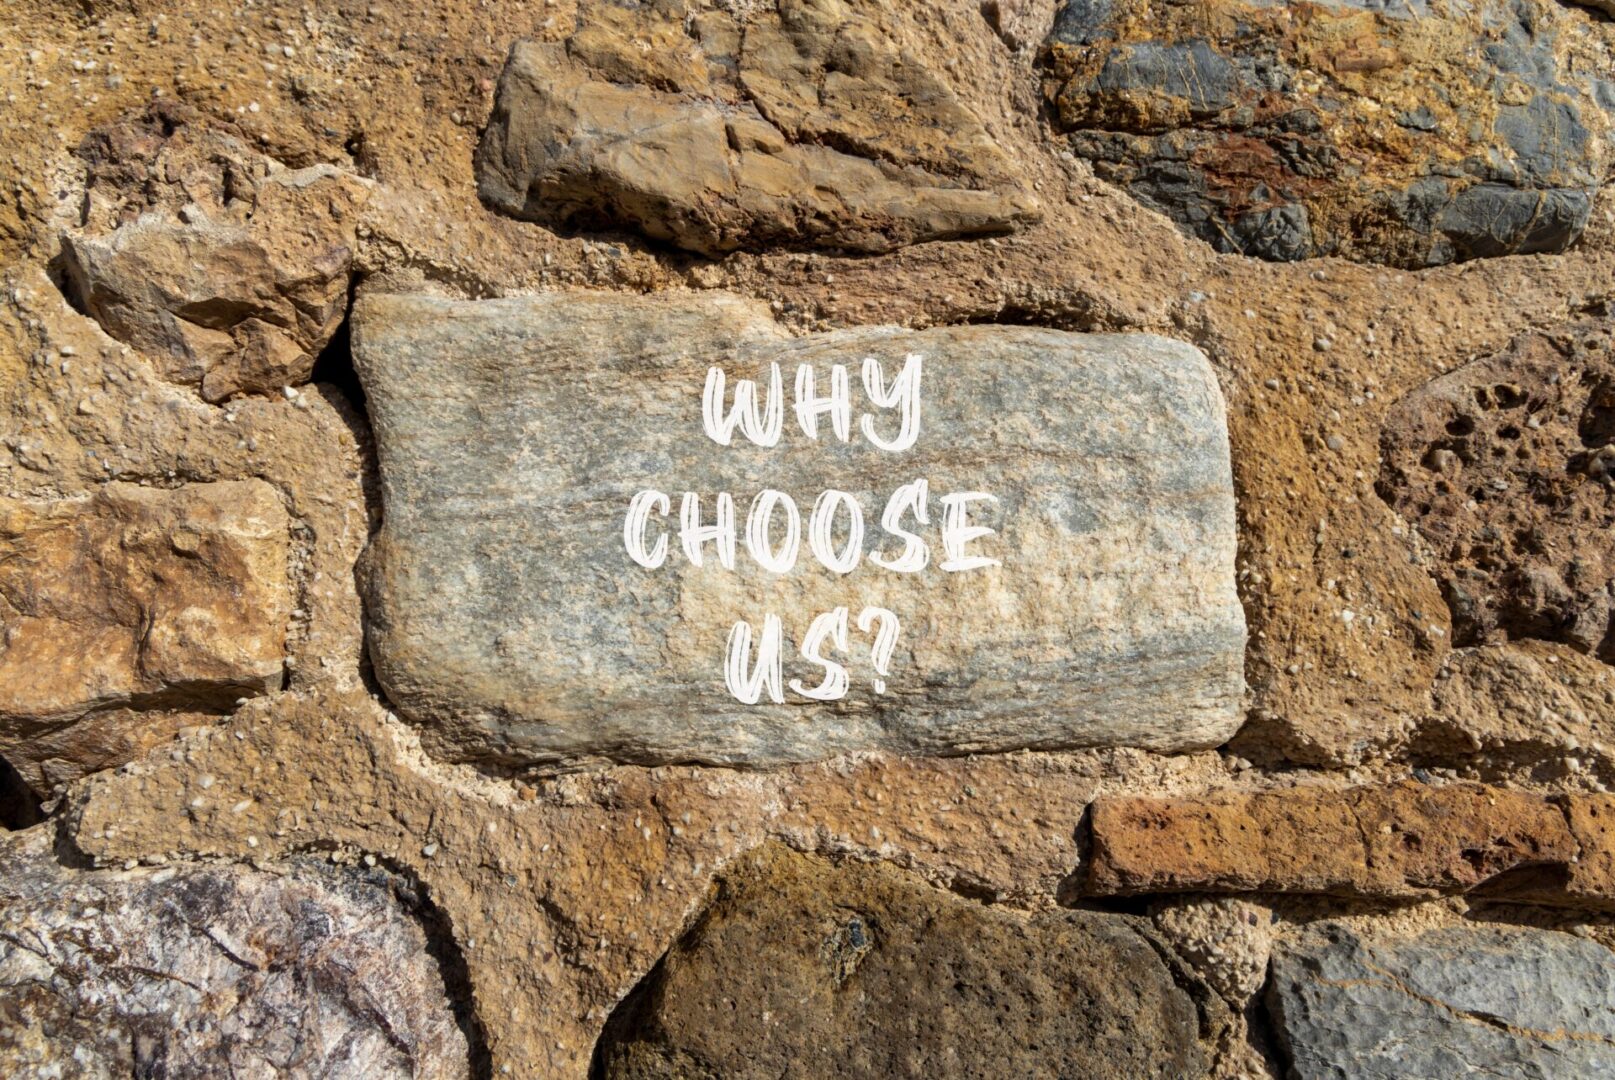 A stone wall with the words " why choose us ?" written on it.